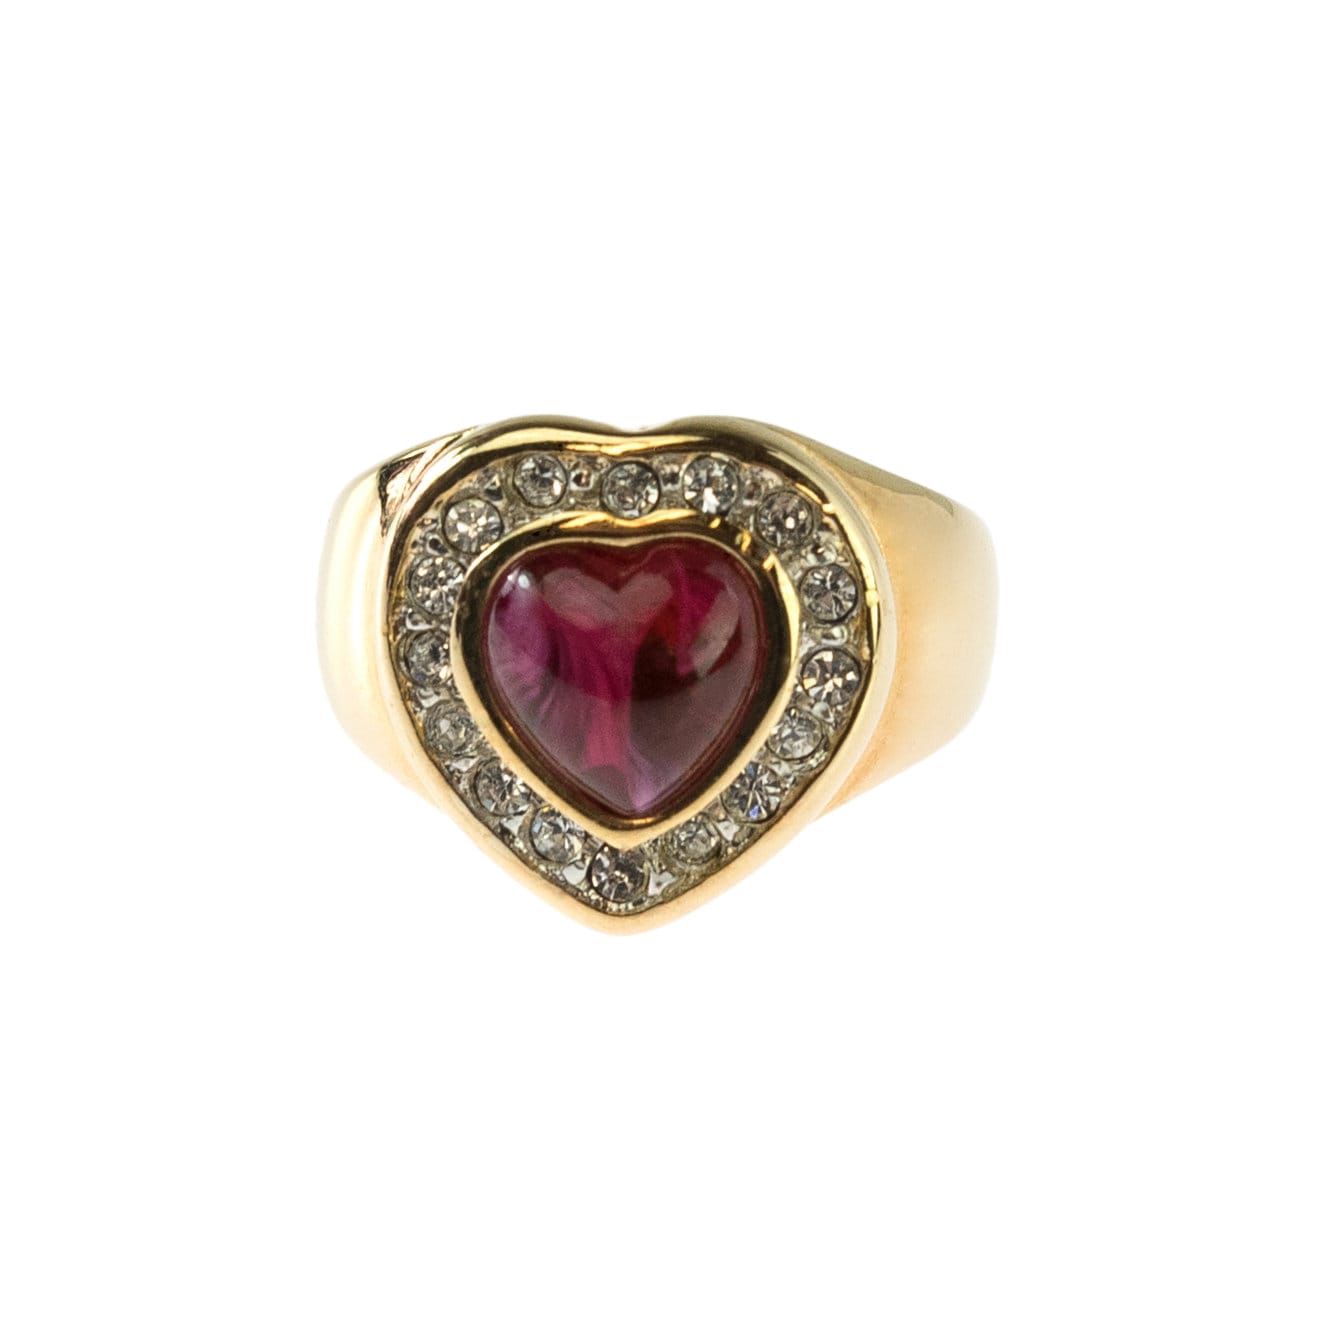 Vintage Ring Red and Clear Swarovski Crystals Heart Ring 18k Gold Womans Antique R3140 - Limited Stock - Never Worn